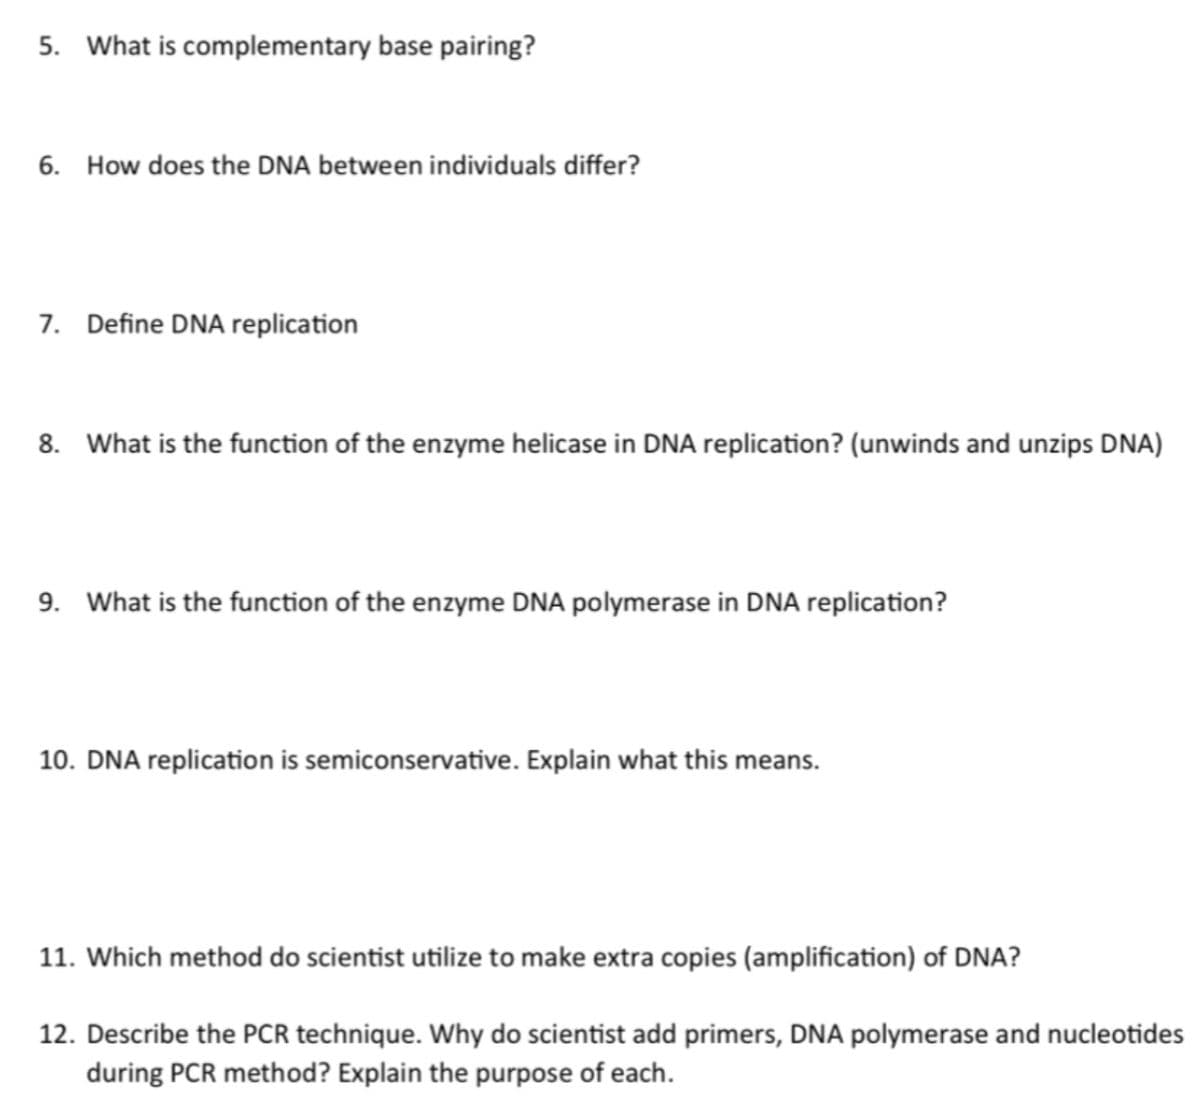 5. What is complementary base pairing?
6. How does the DNA between individuals differ?
7. Define DNA replication
8. What is the function of the enzyme helicase in DNA replication? (unwinds and unzips DNA)
9. What is the function of the enzyme DNA polymerase in DNA replication?
10. DNA replication is semiconservative. Explain what this means.
11. Which method do scientist utilize to make extra copies (amplification) of DNA?
12. Describe the PCR technique. Why do scientist add primers, DNA polymerase and nucleotides
during PCR method? Explain the purpose of each.
